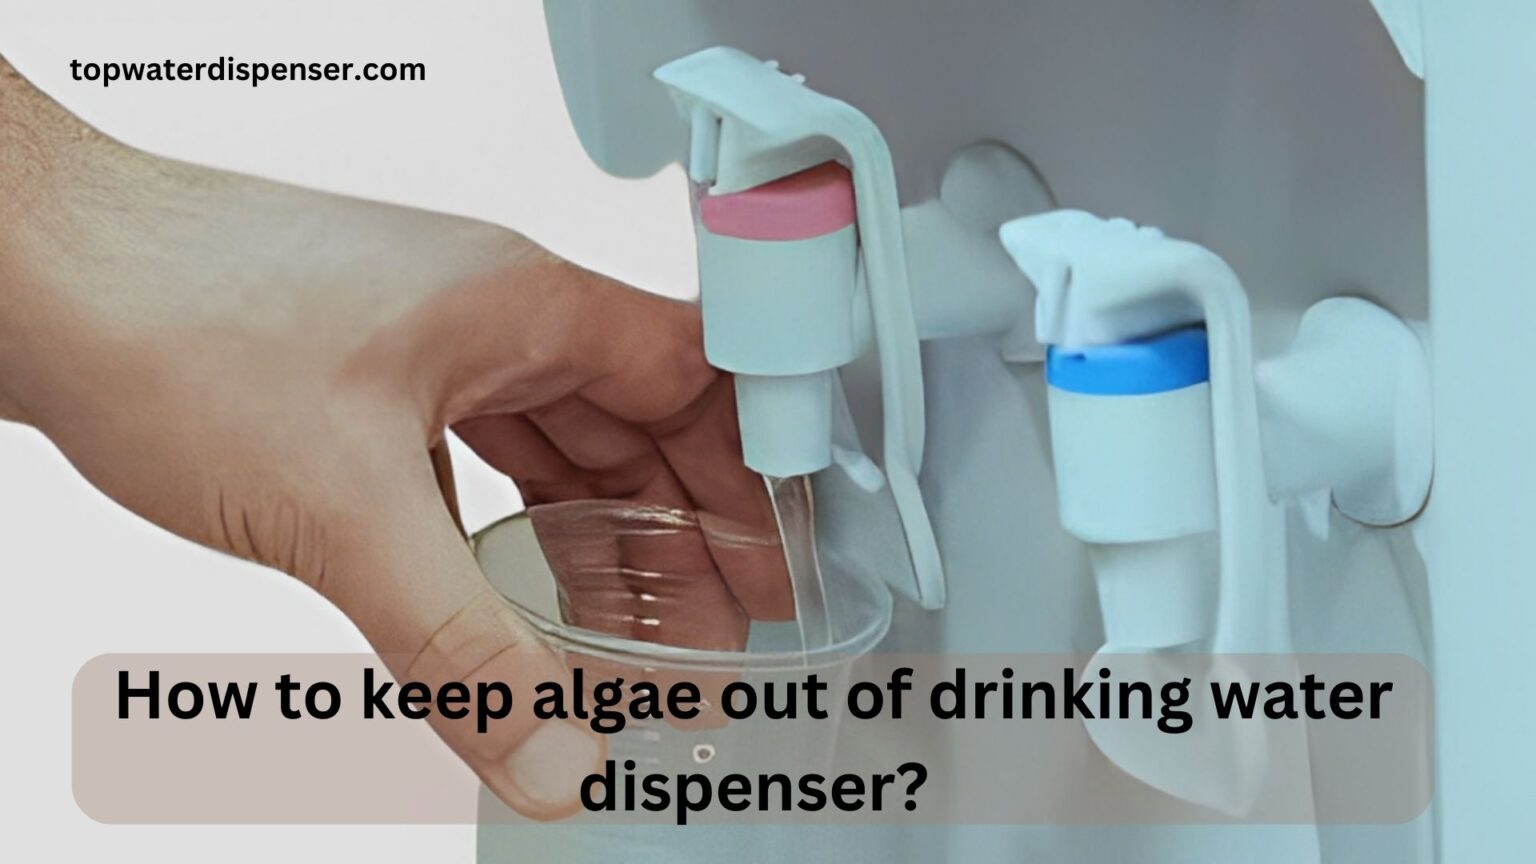 How to keep algae out of drinking water dispenser?